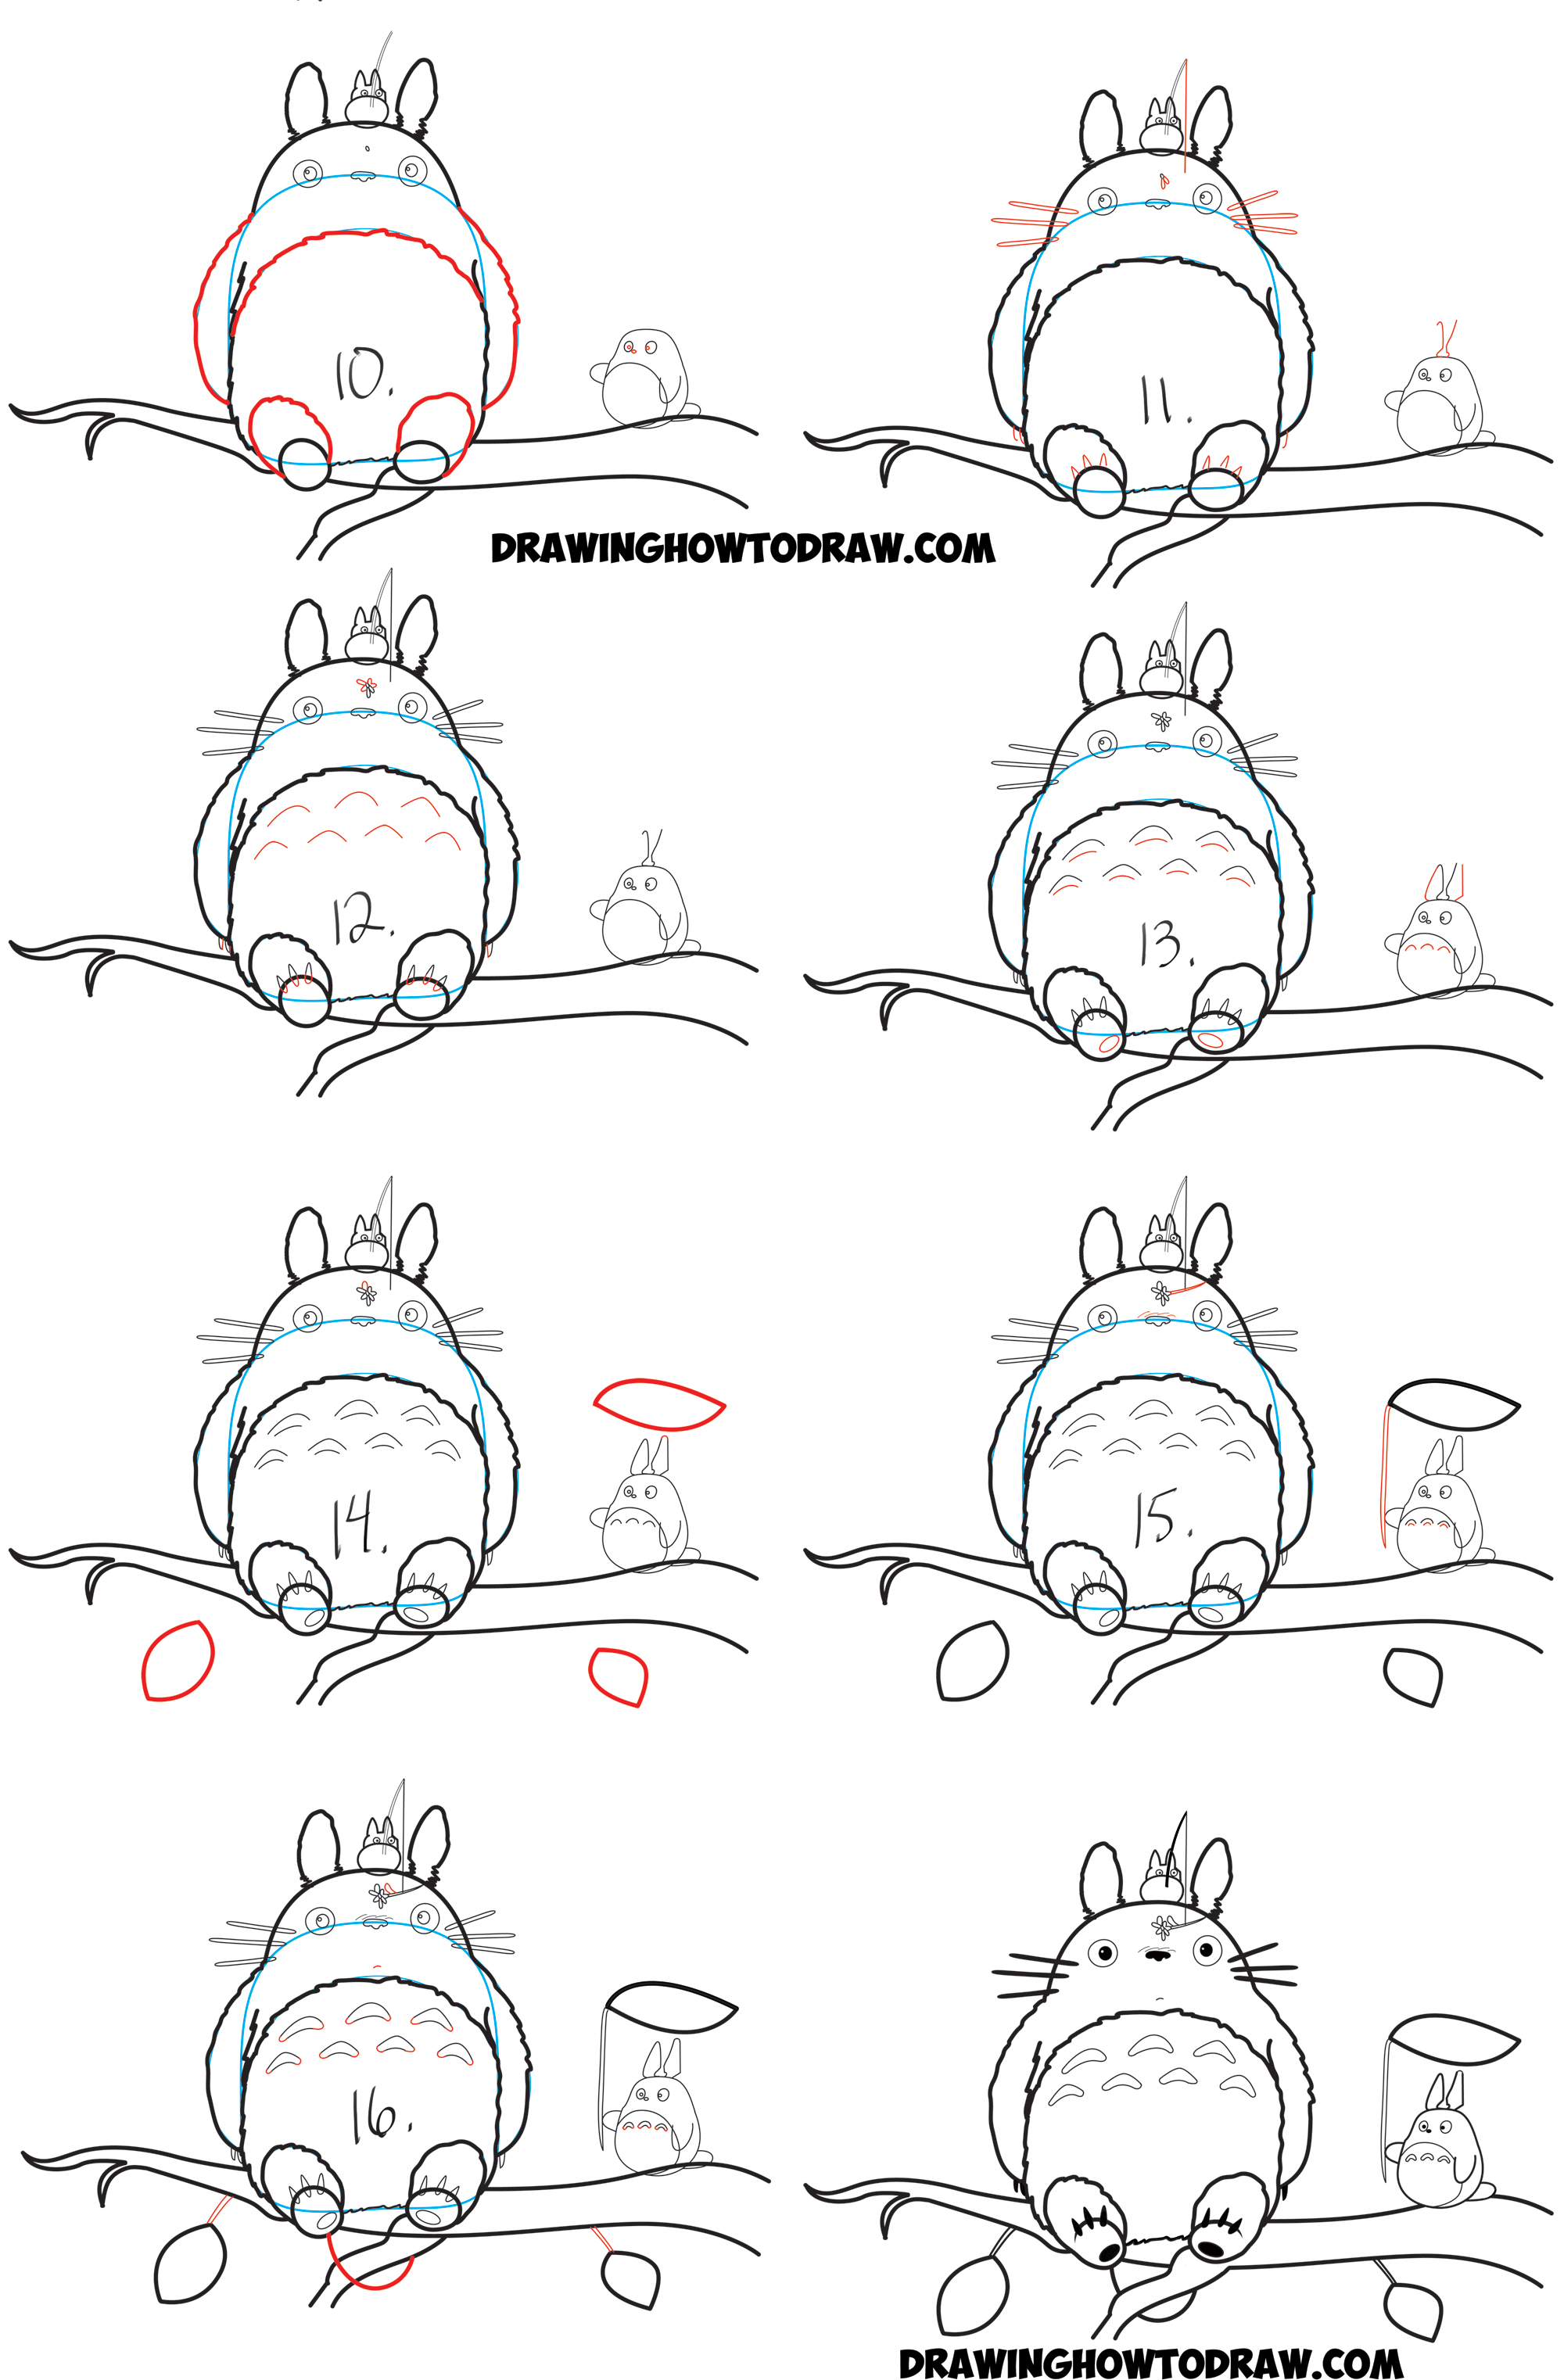 How to Draw Totoro from My Neighbor Totoro Easy Step by Step Drawing